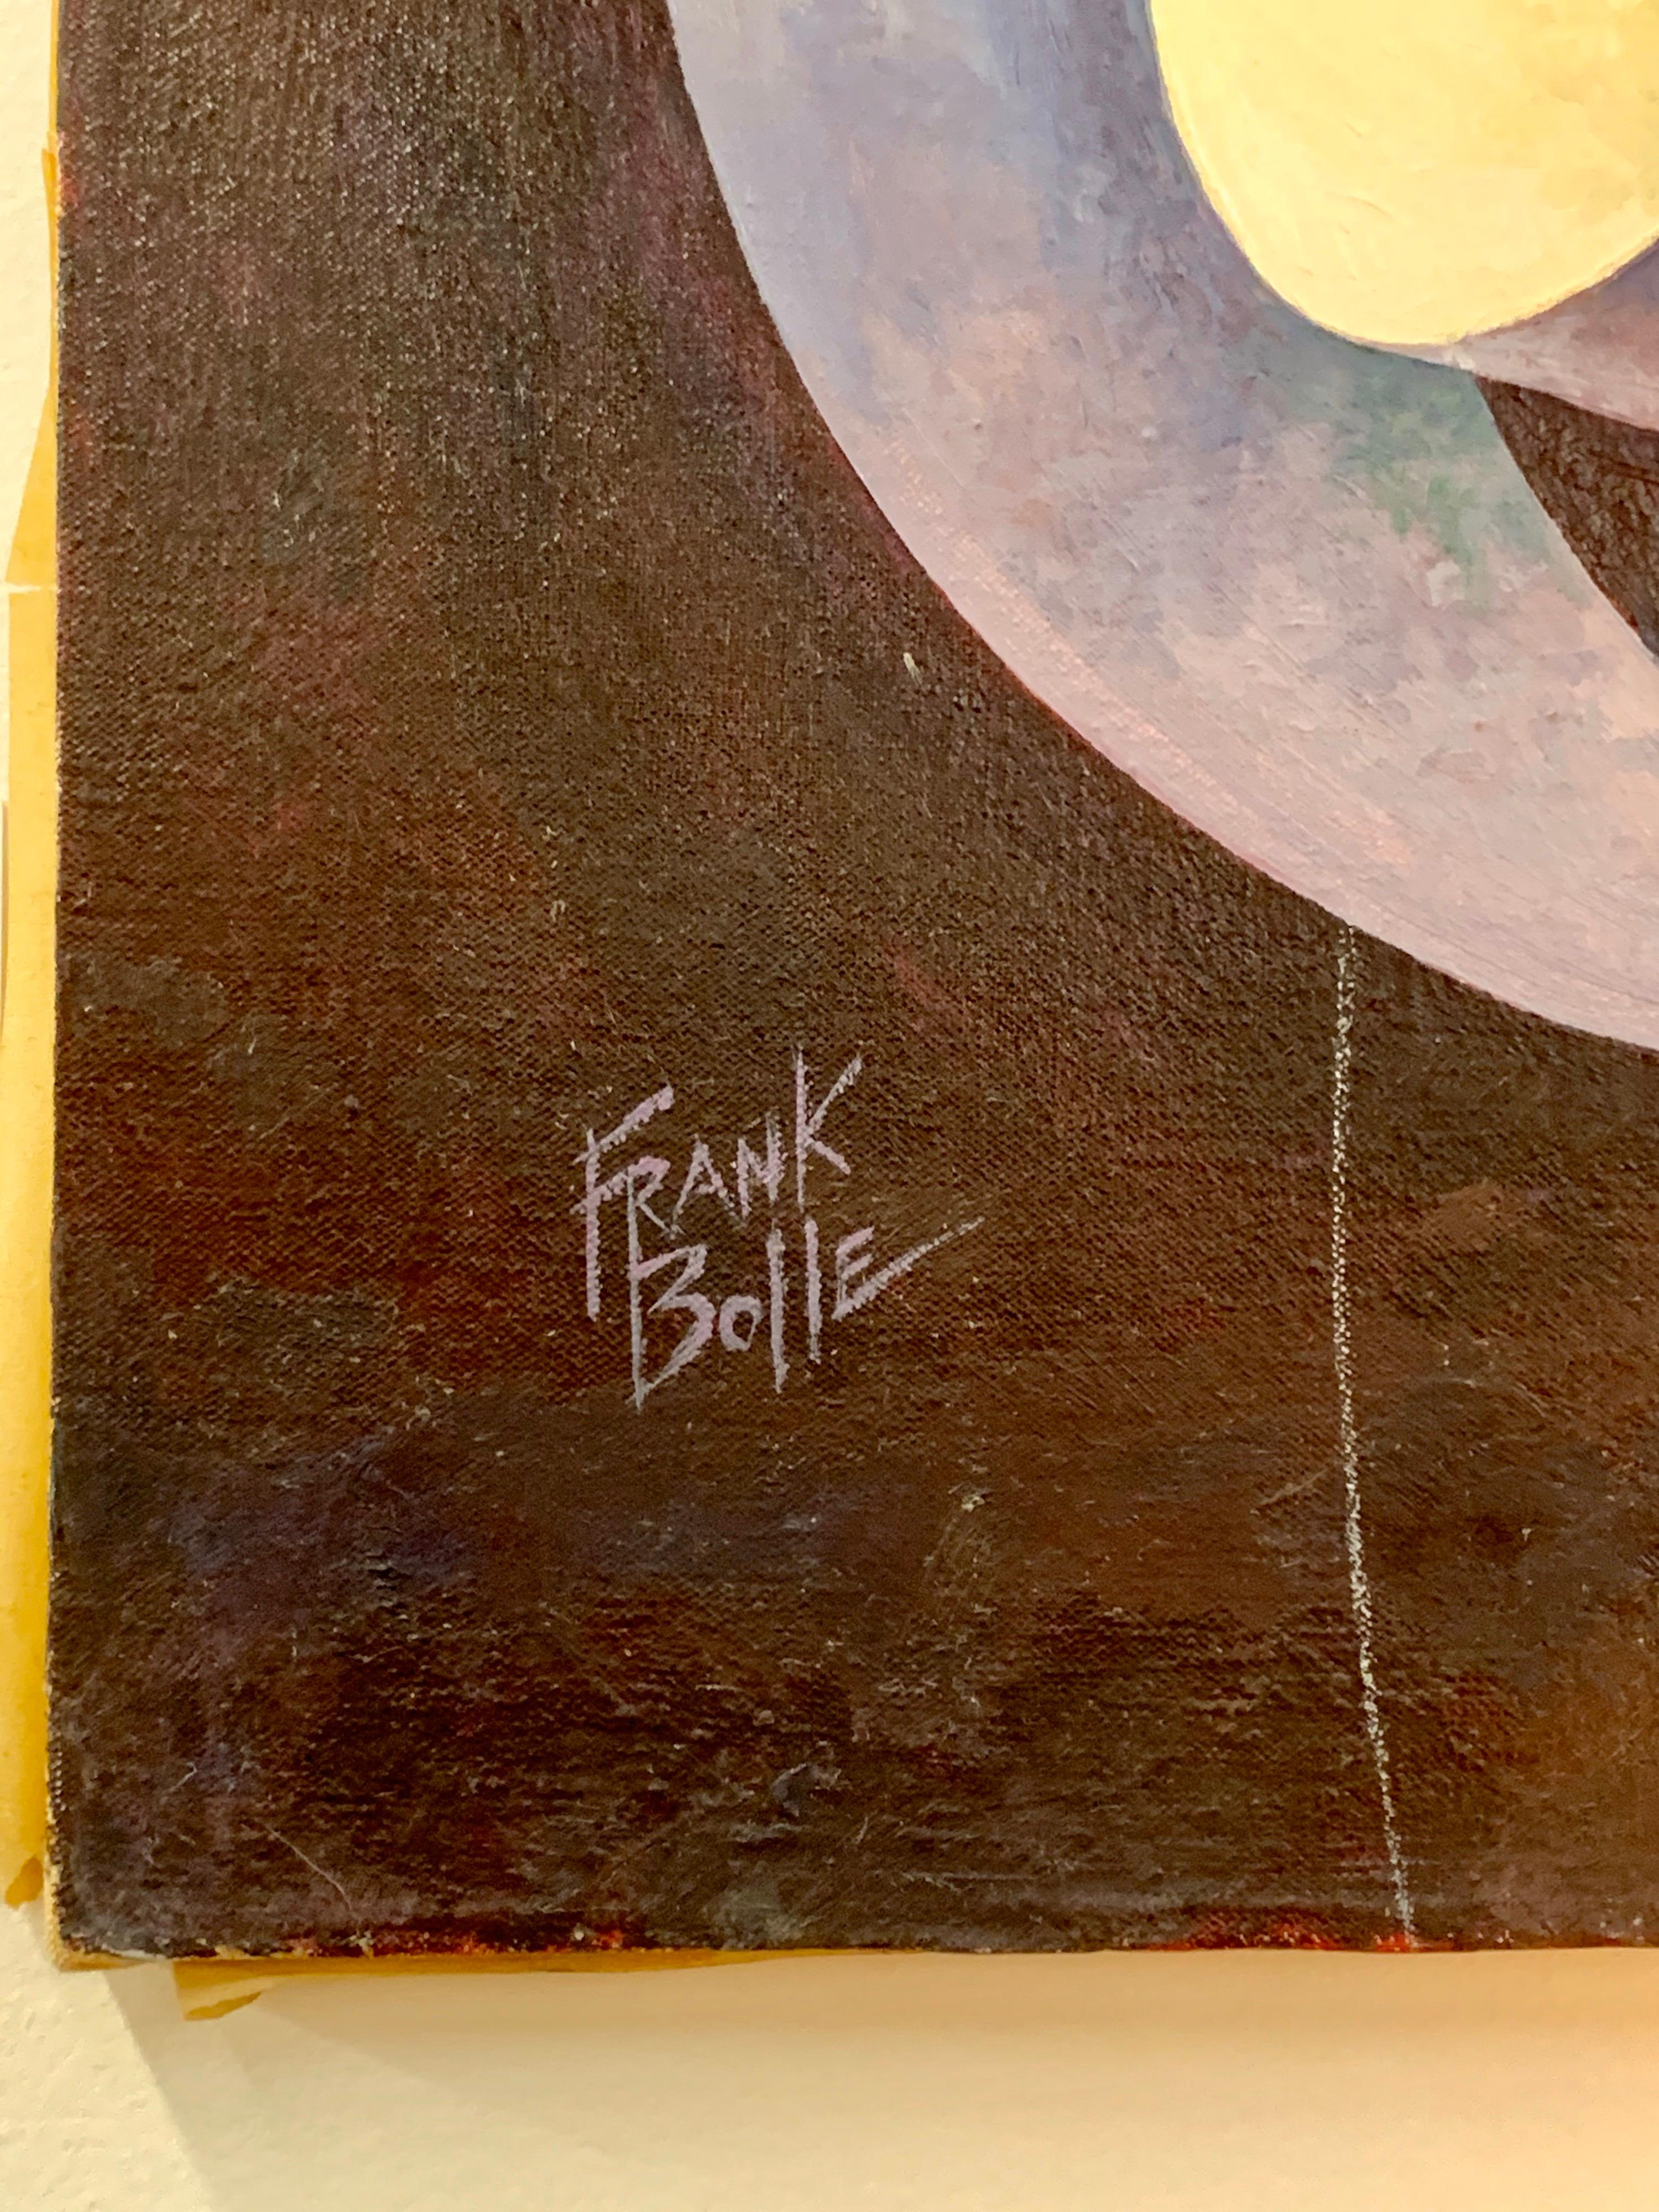 Signed original Frank Bolle original oil painting with abstract architectural sculpture as its subject.